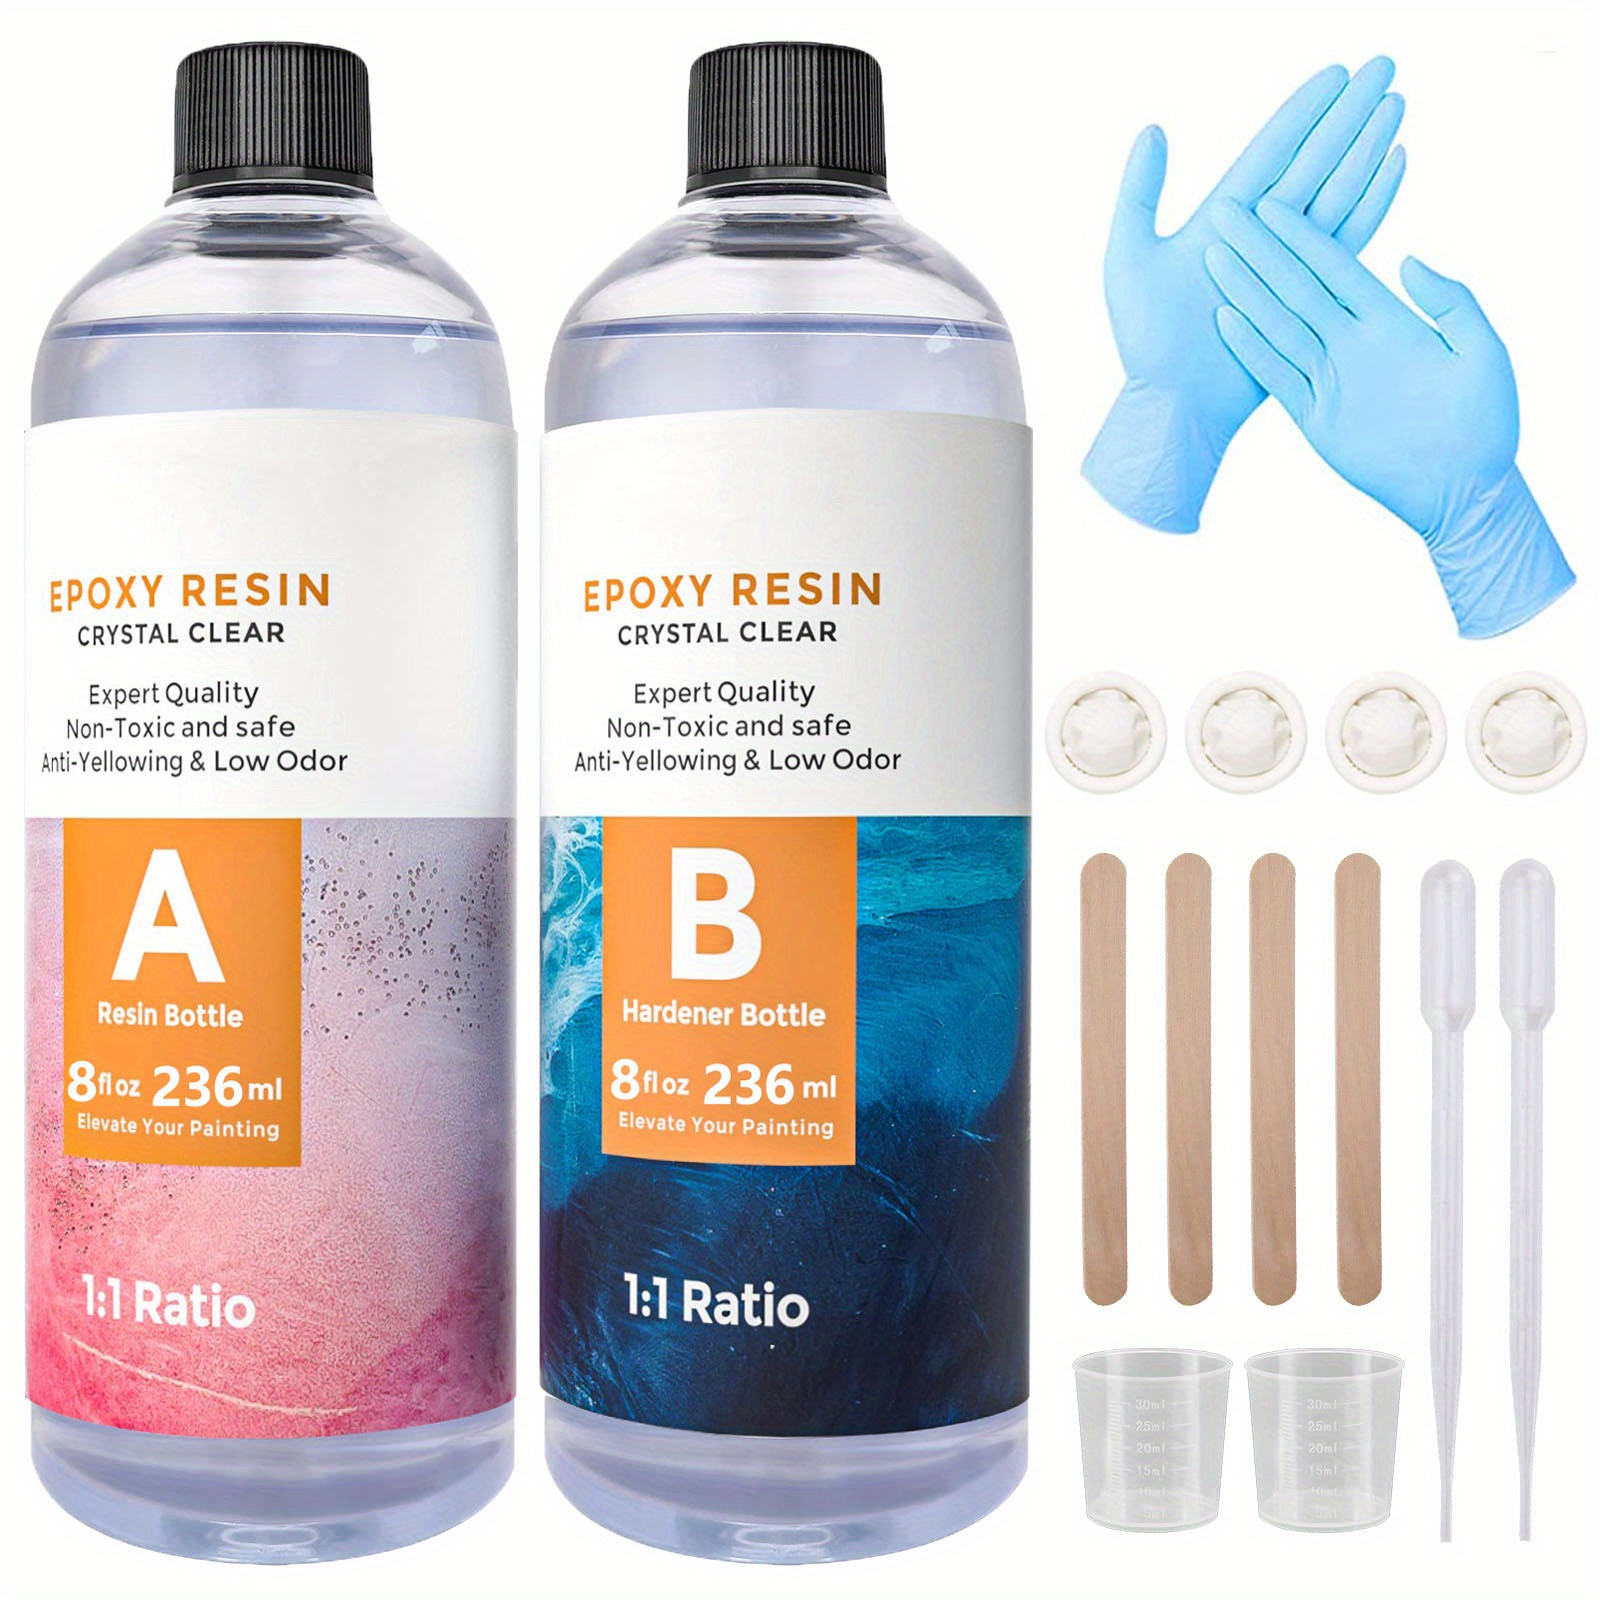 16oz 2 Part Epoxy Resin and Hardener, Crystal Clear Epoxy Resin